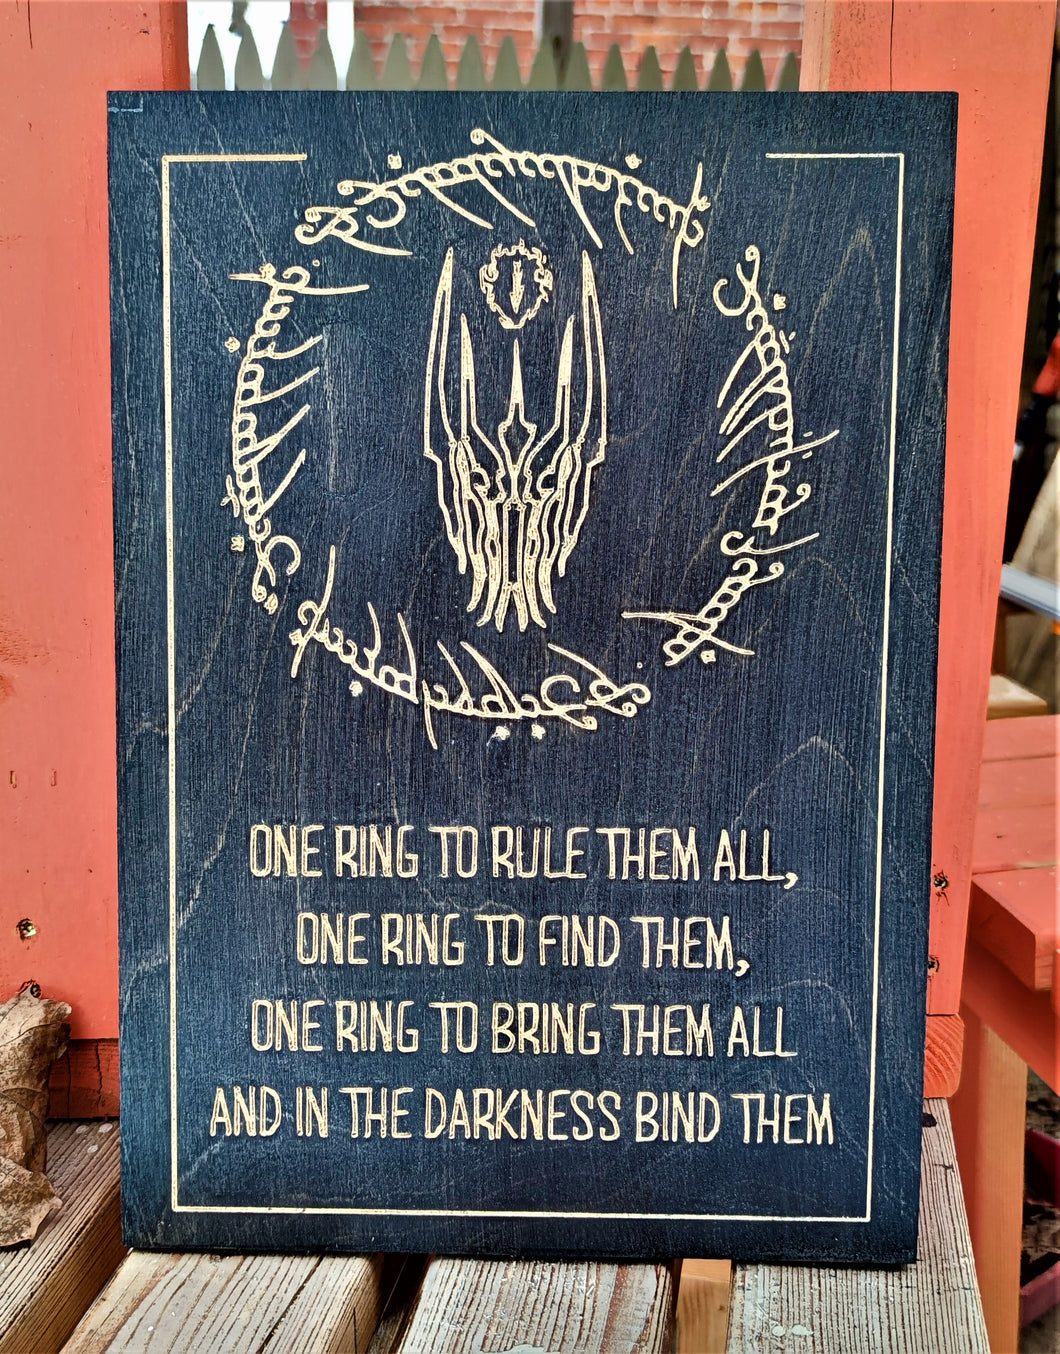 Lord of the Rings LOTR Sauron One Ring Inscription Carve Wood Sign Wall Art Man Cave Norse